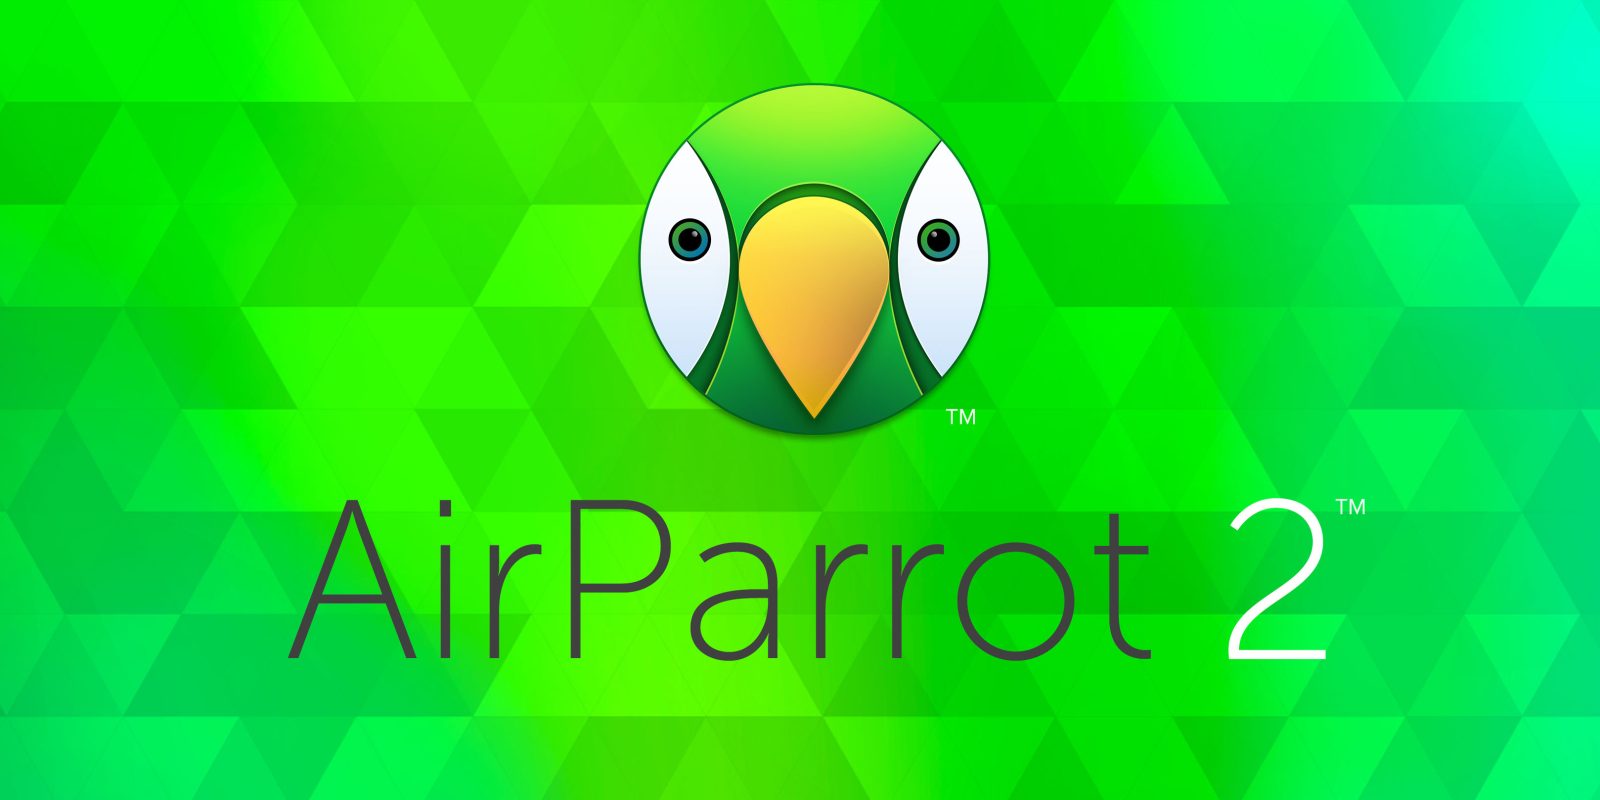 airparrot 2 not connecting